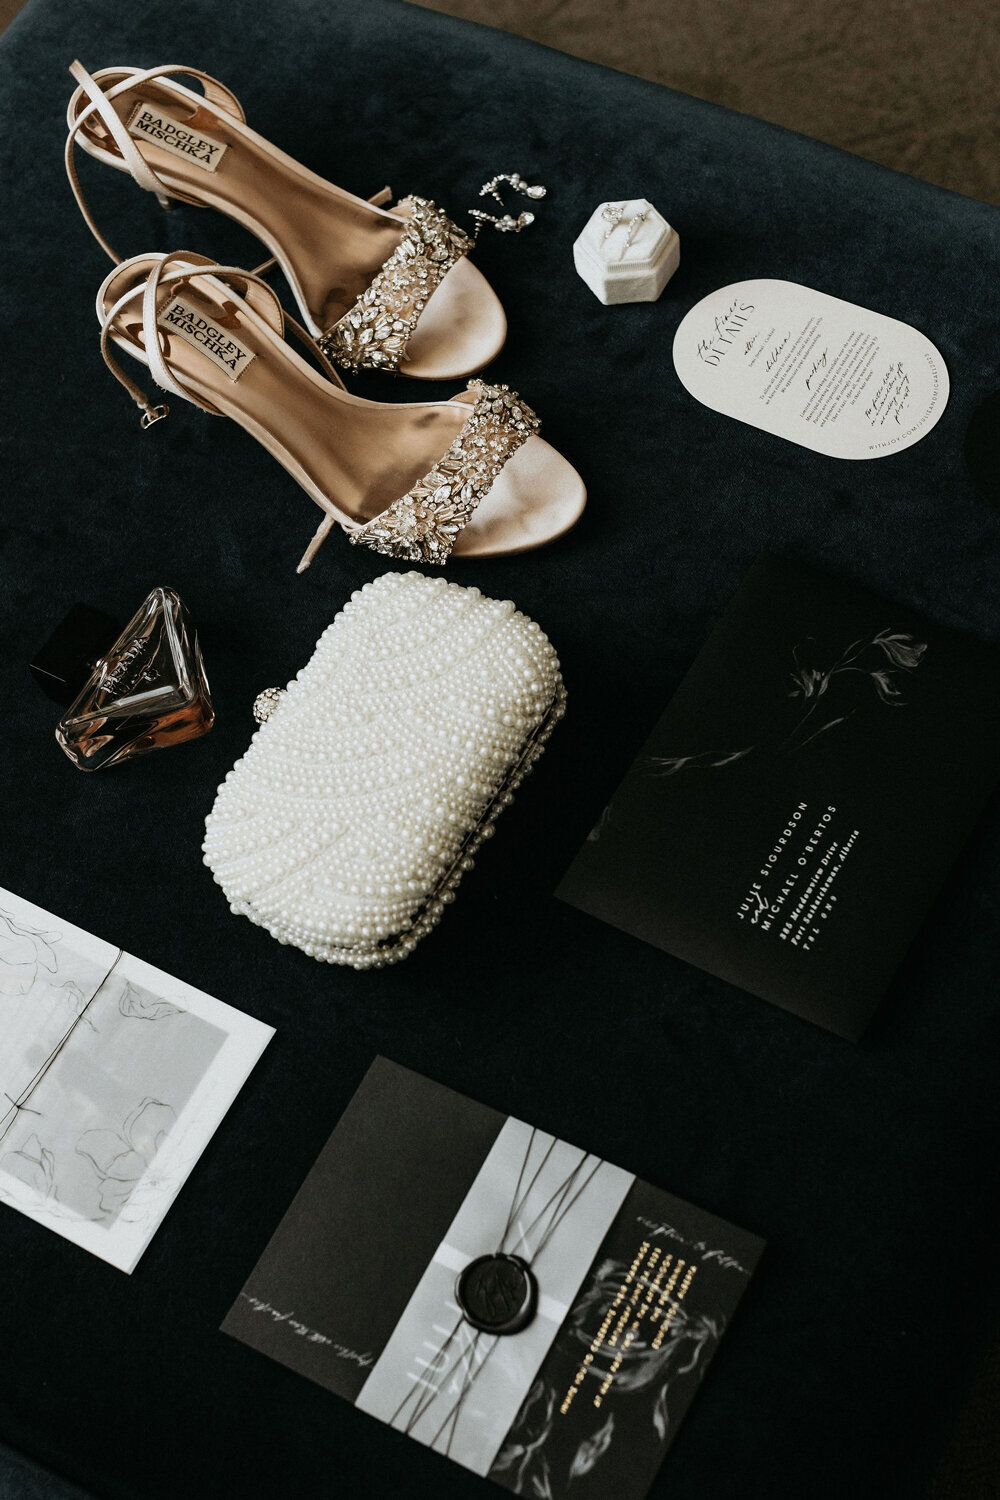 Bride's wedding accessories laid out with wedding invitation.